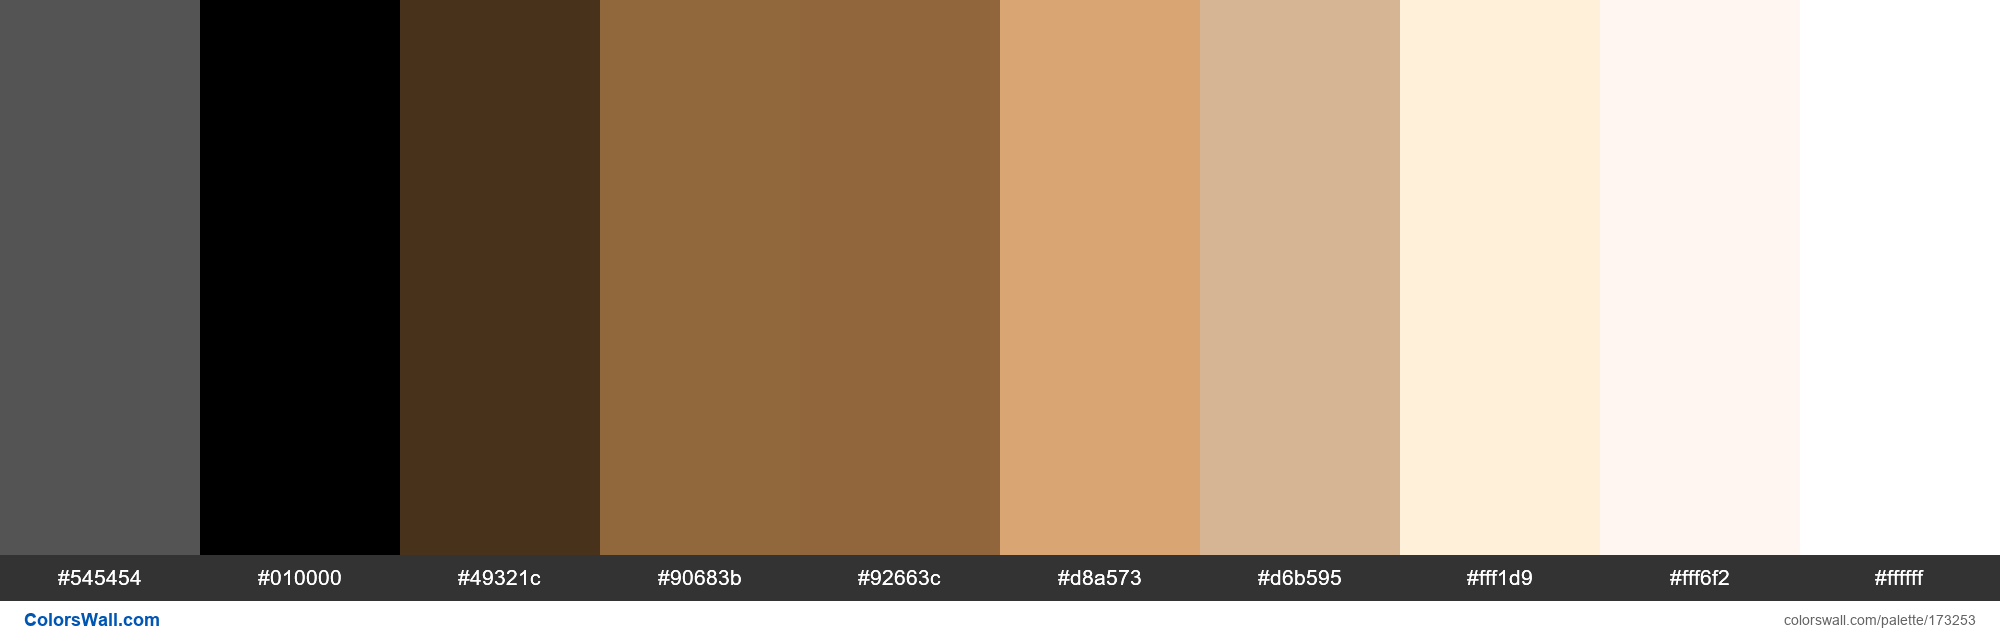 Aesthetic Brown colors palette - ColorsWall